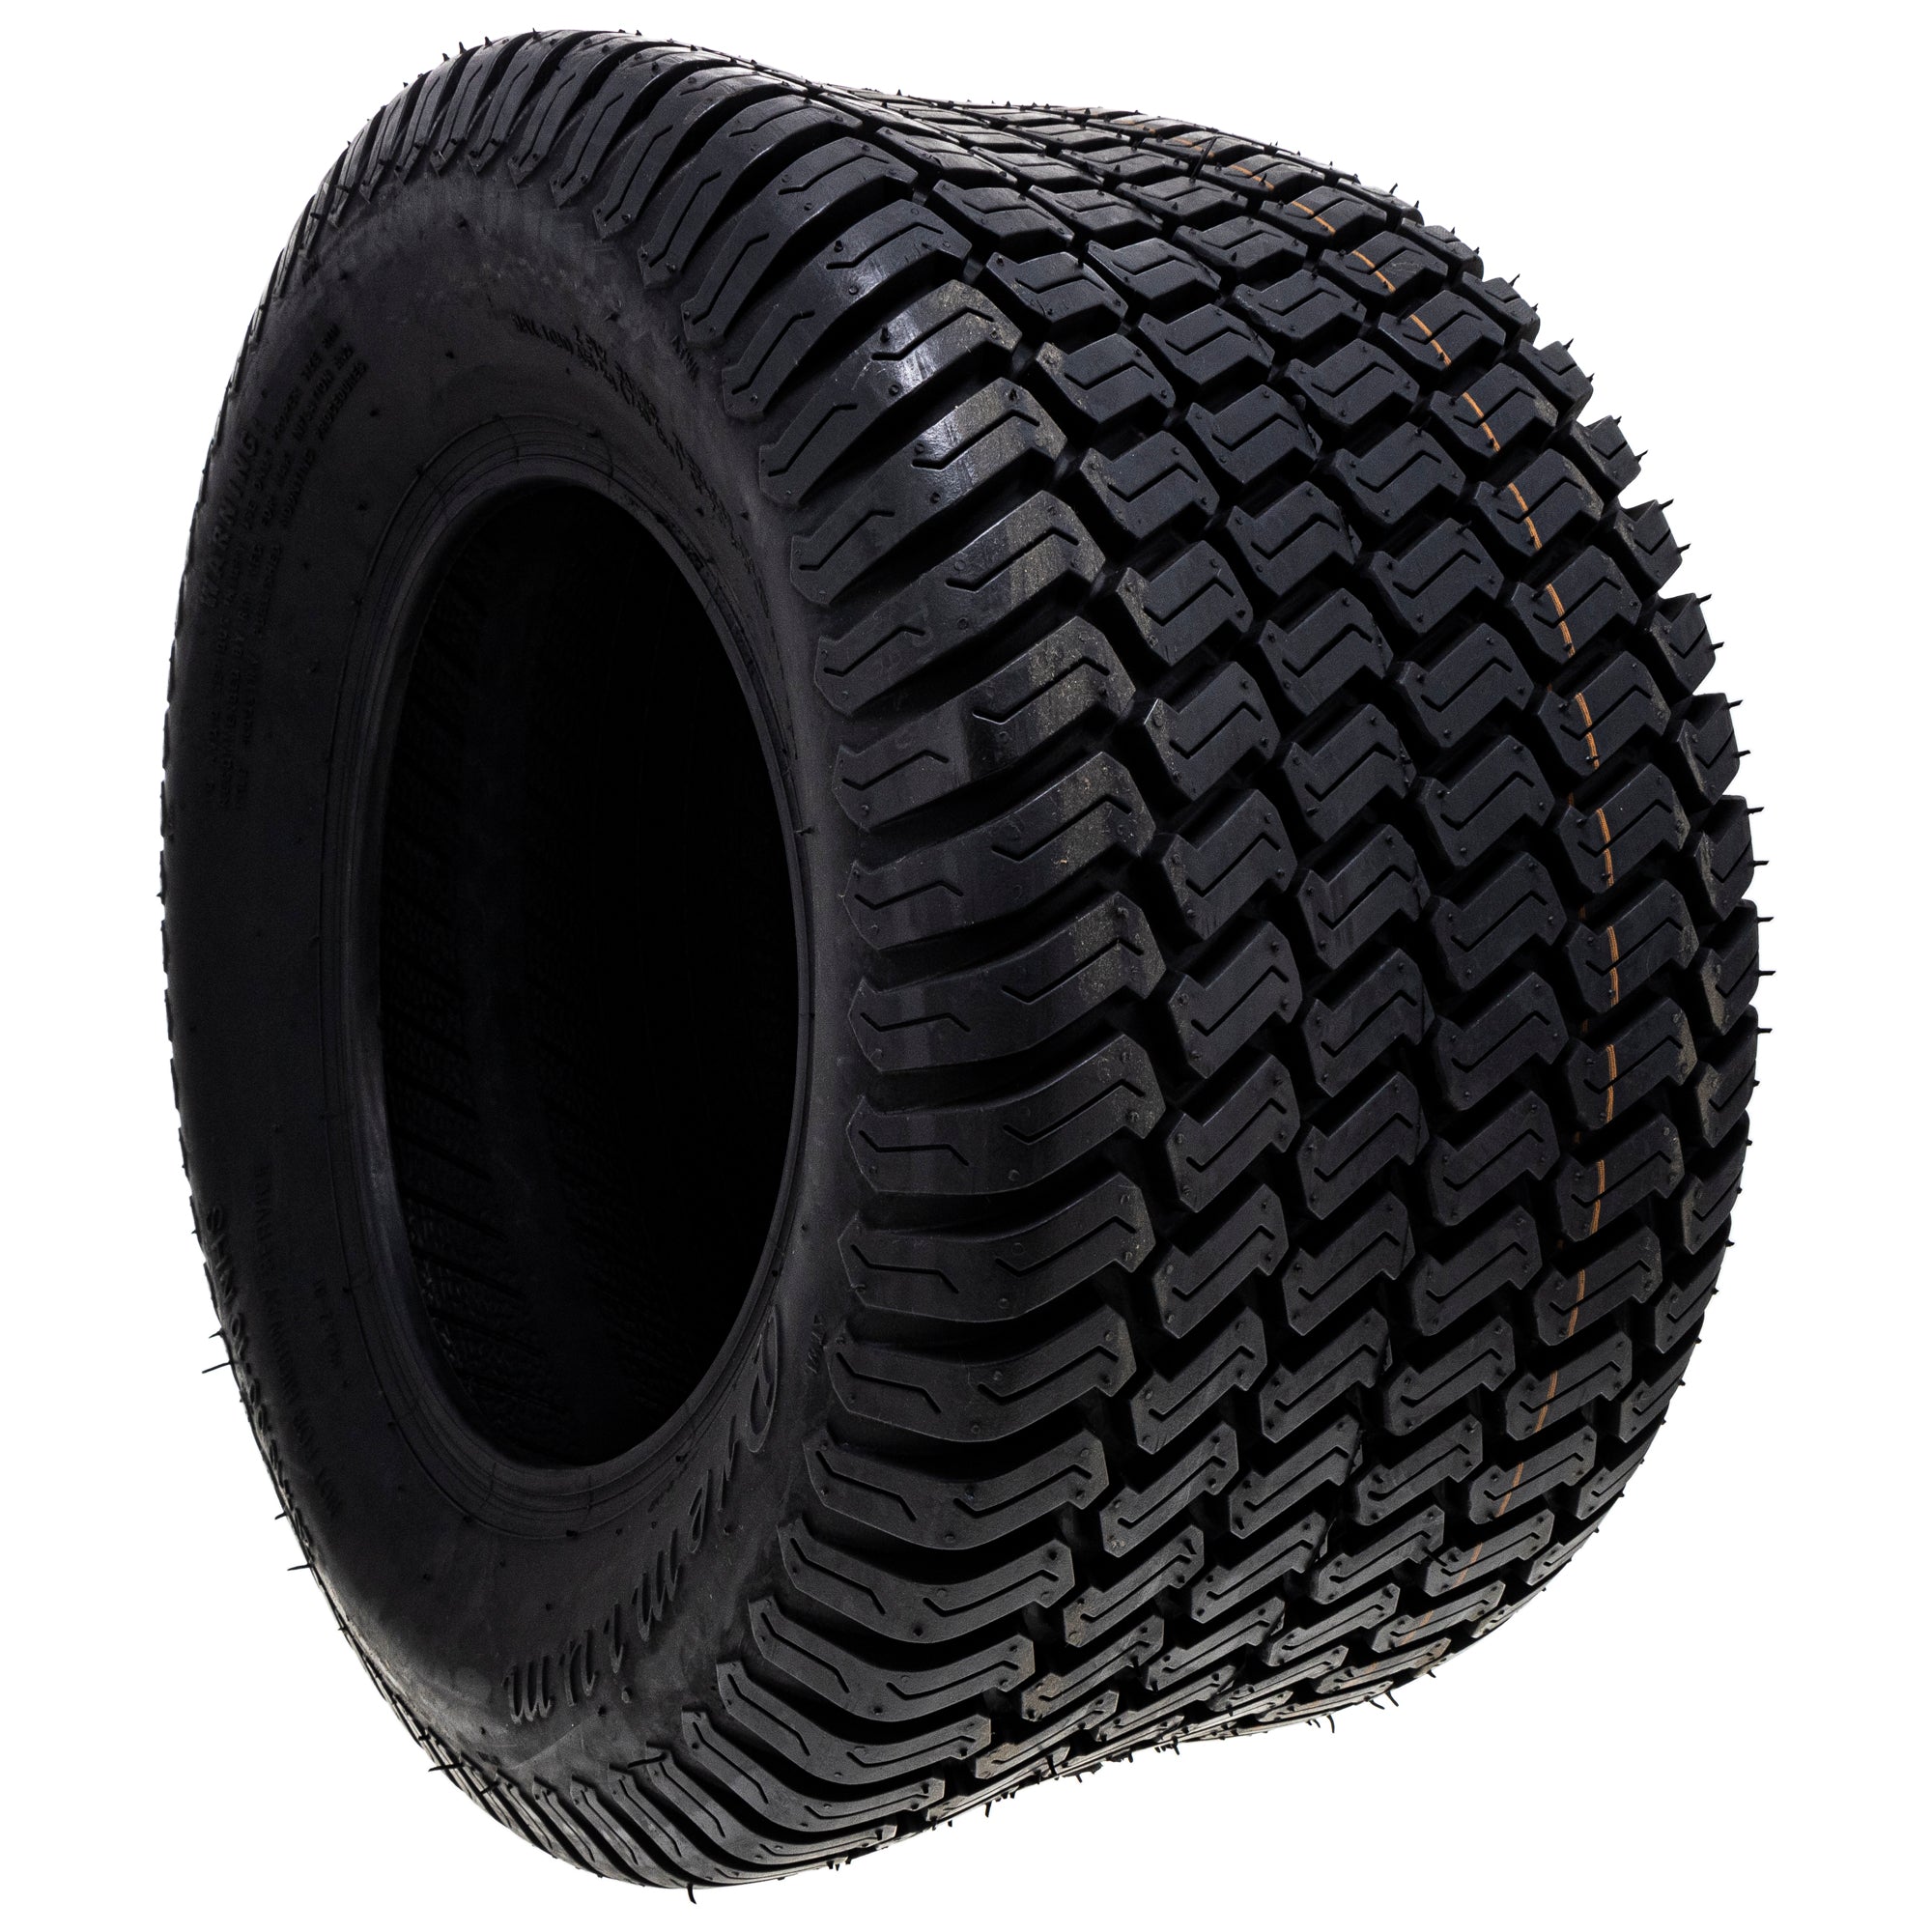 Exmark 133-9293 2 Tires | Mow The Lawn